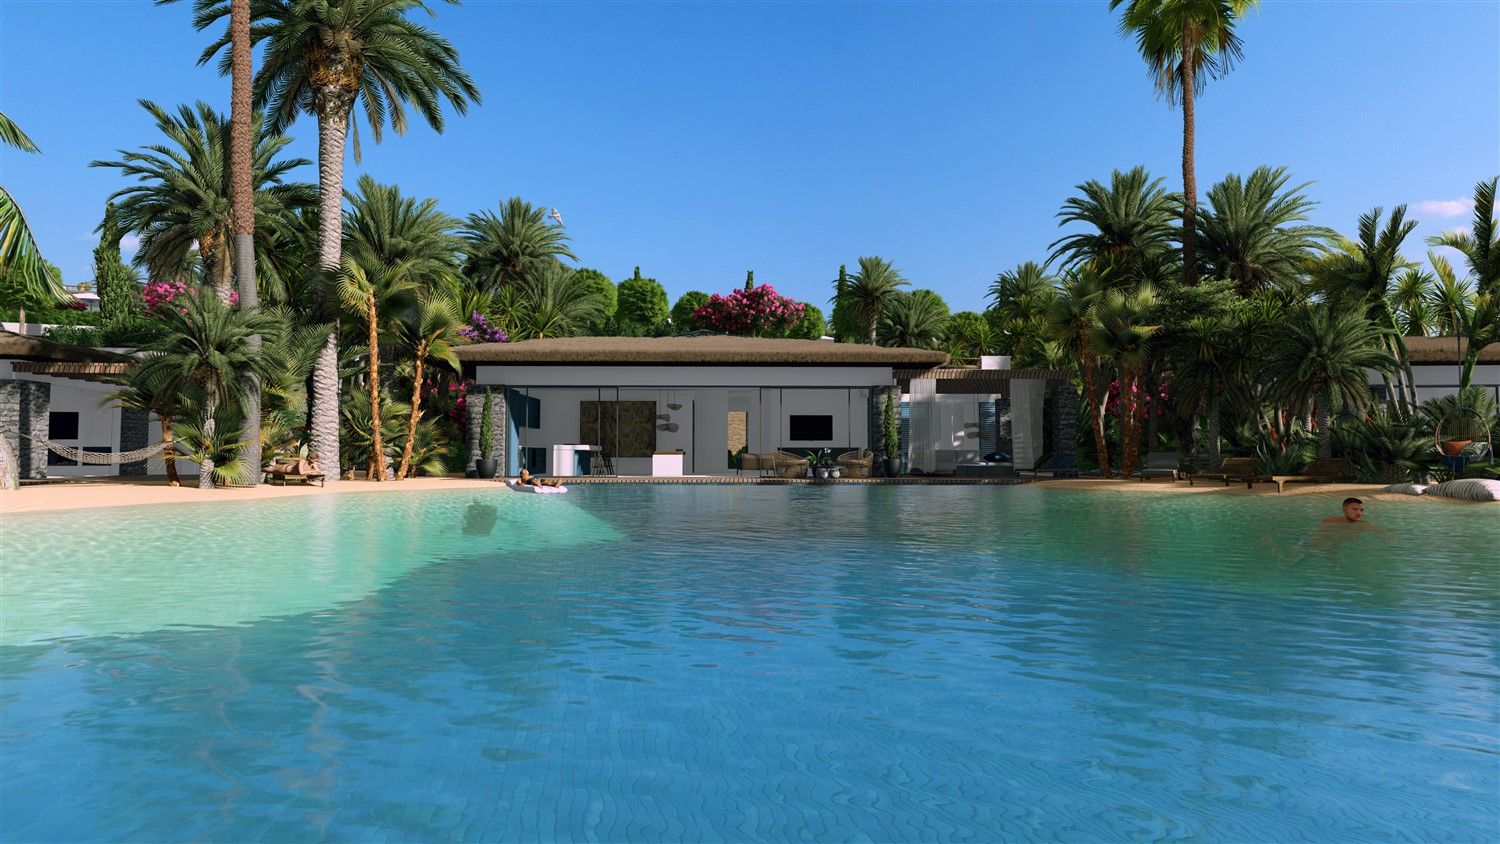 Luxurious 4-bedroom beach villa with private pools and beach